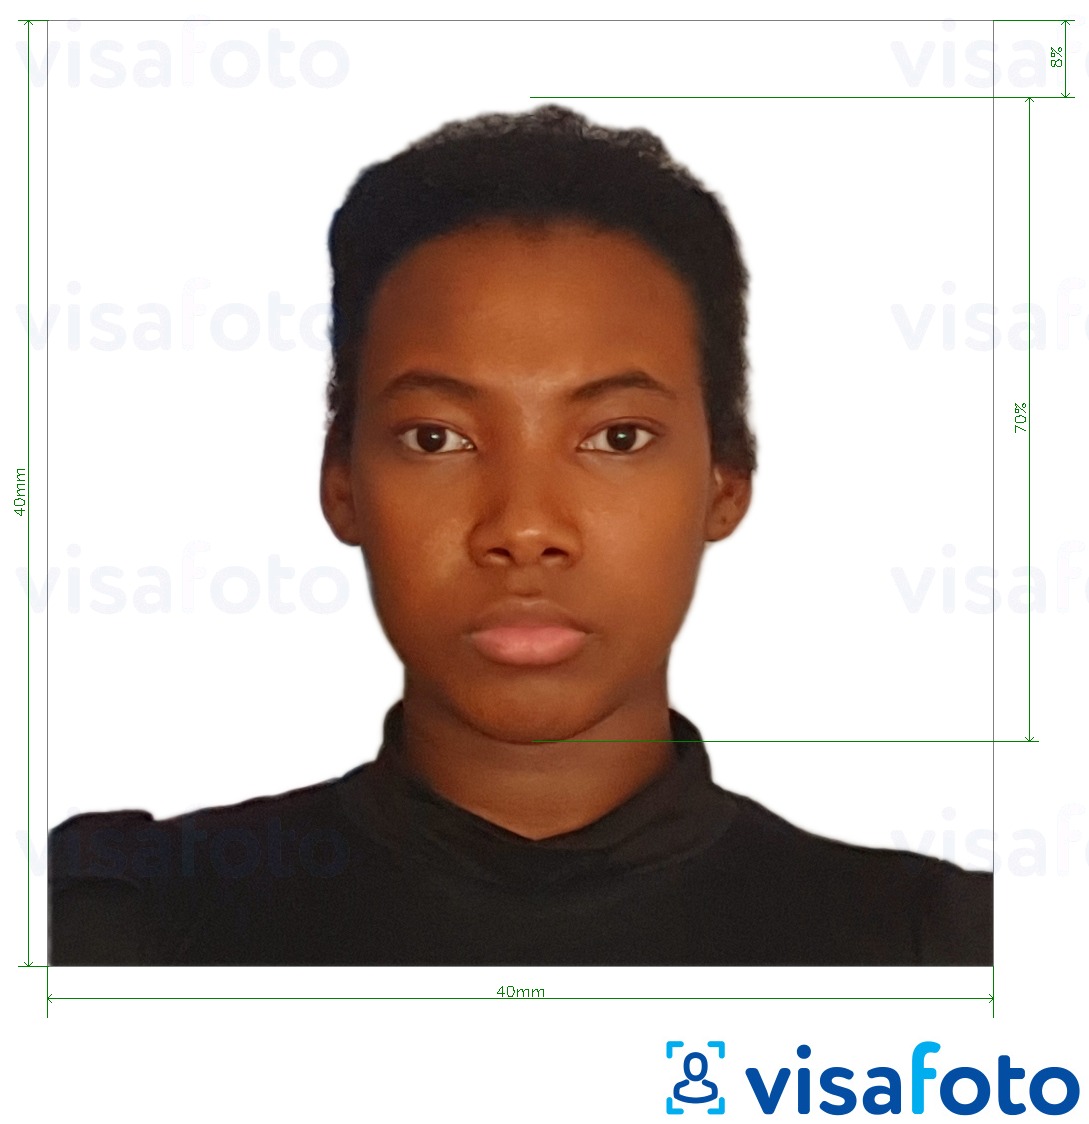 Example of photo for Madagascar visa 40x40 mm with exact size specification